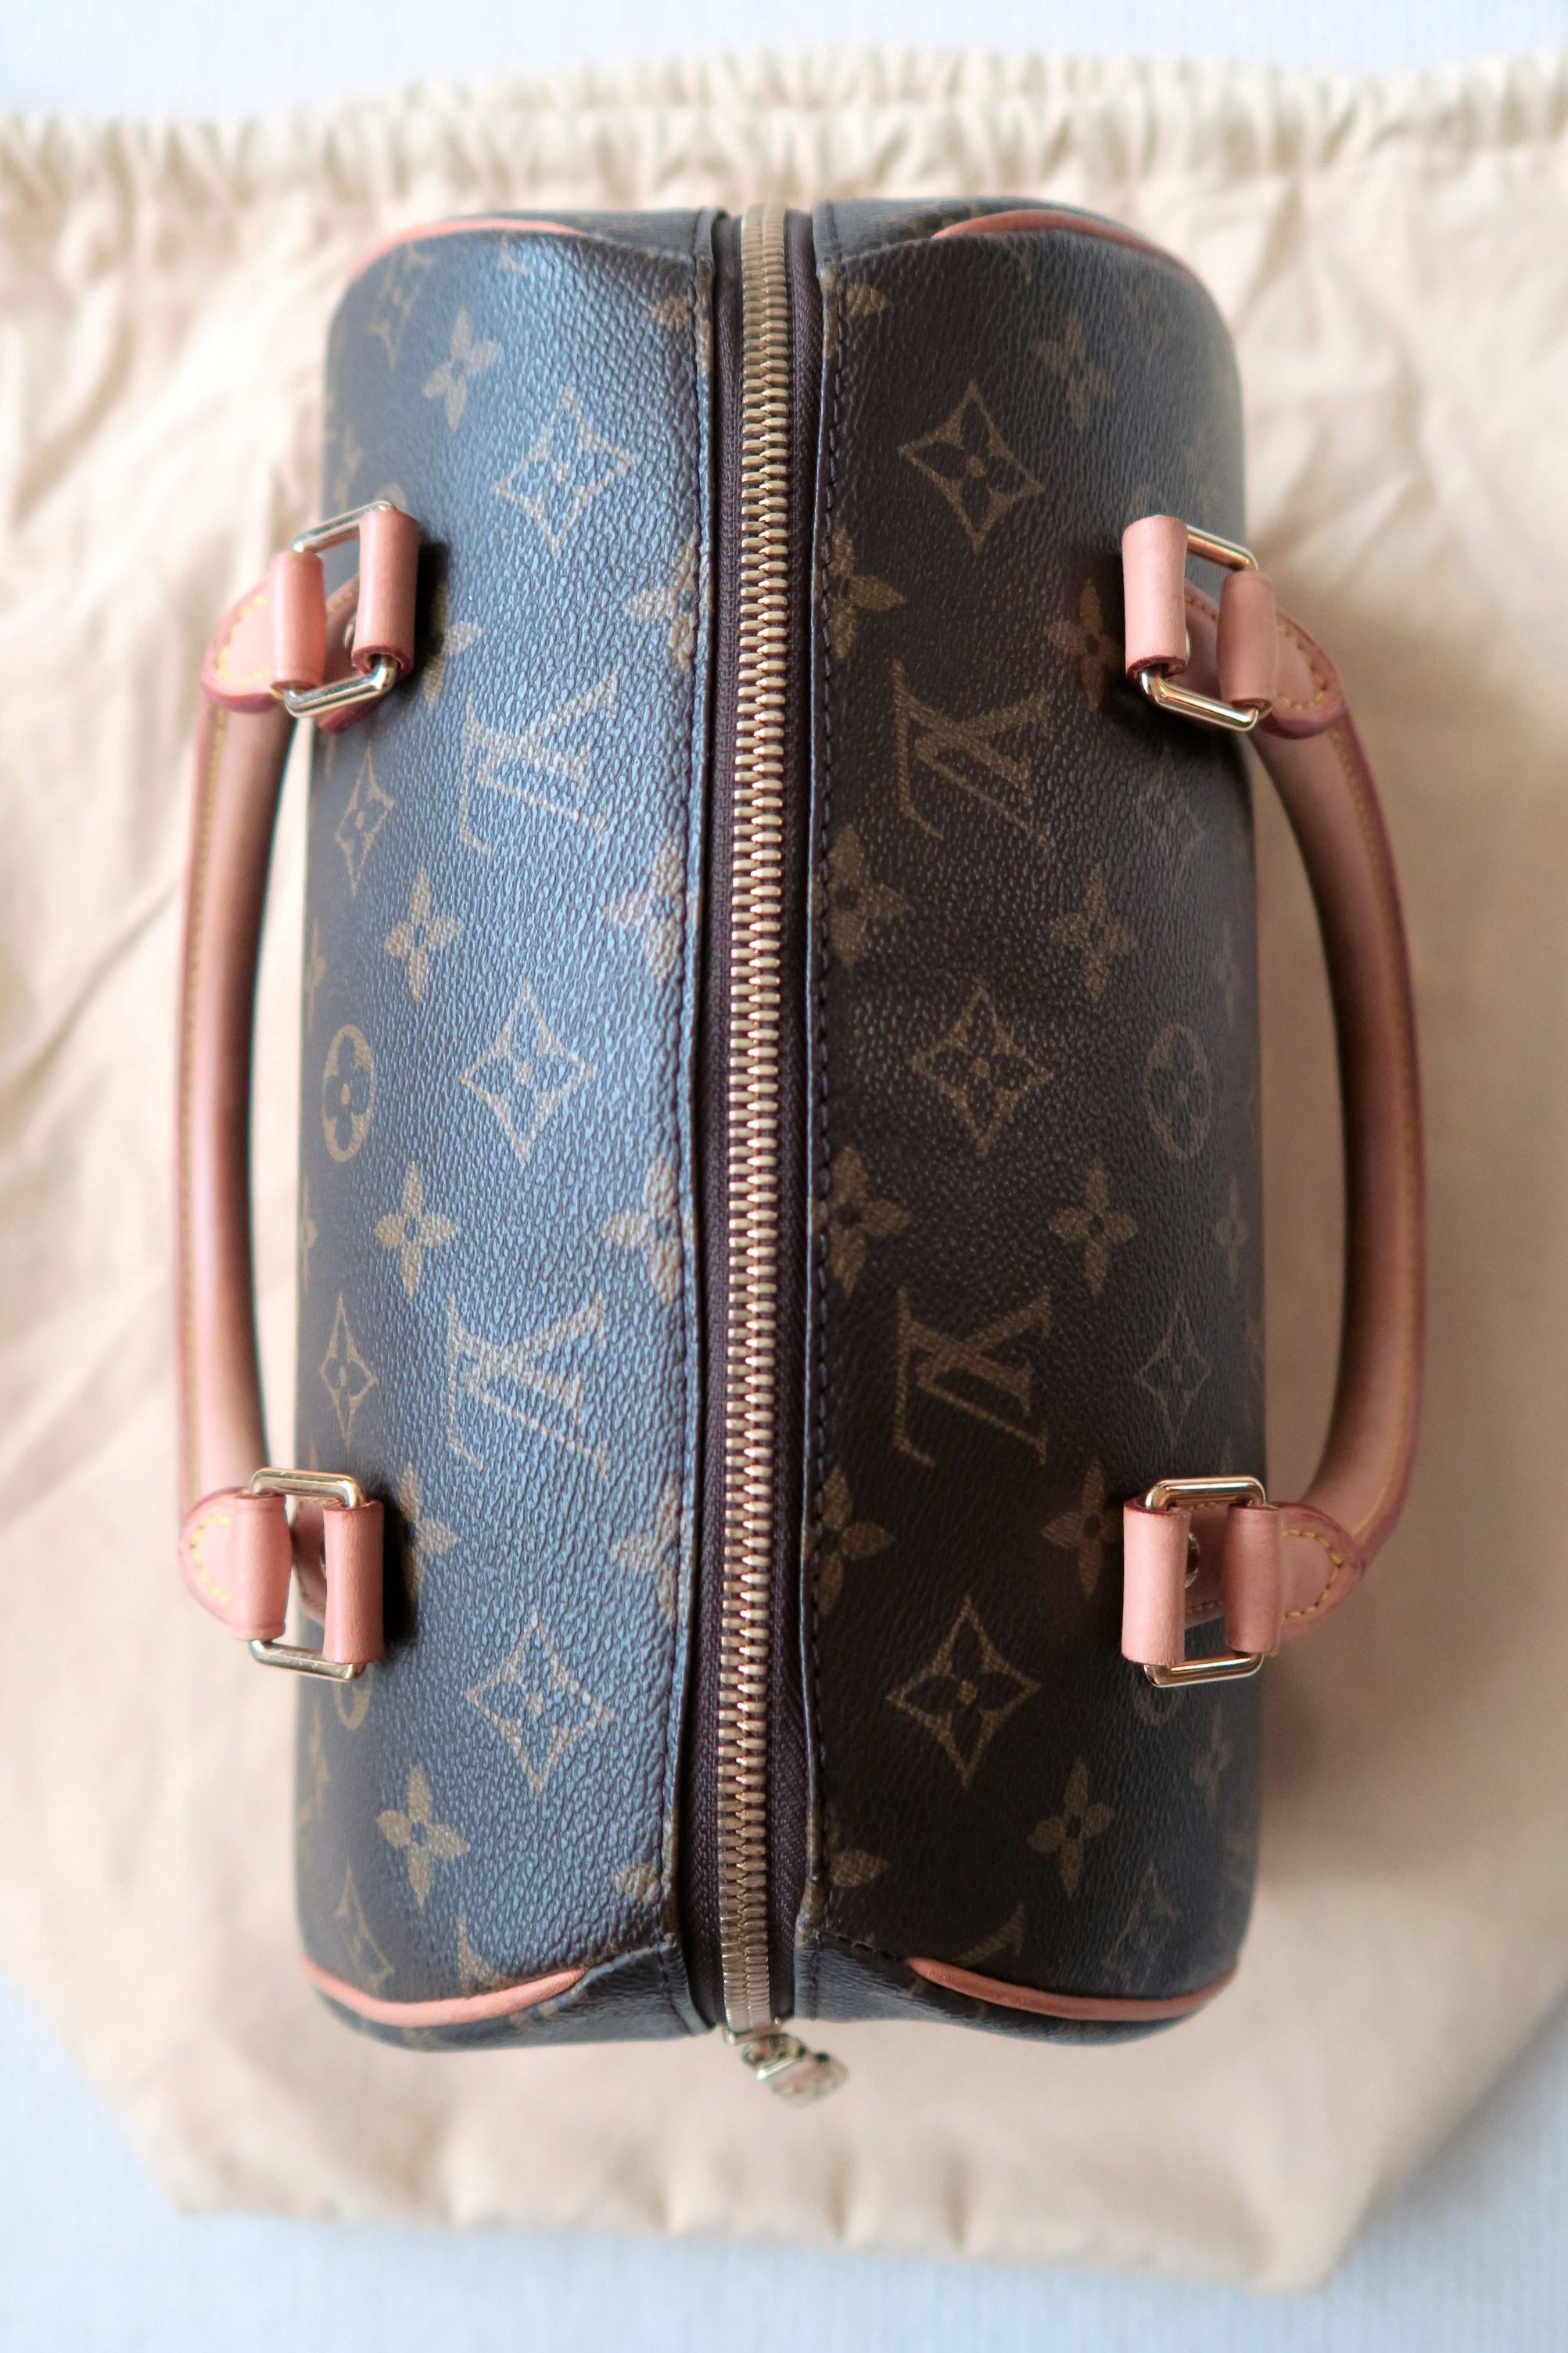 Louis Vuitton - Authenticated Muria Handbag - Leather Grey for Women, Very Good Condition